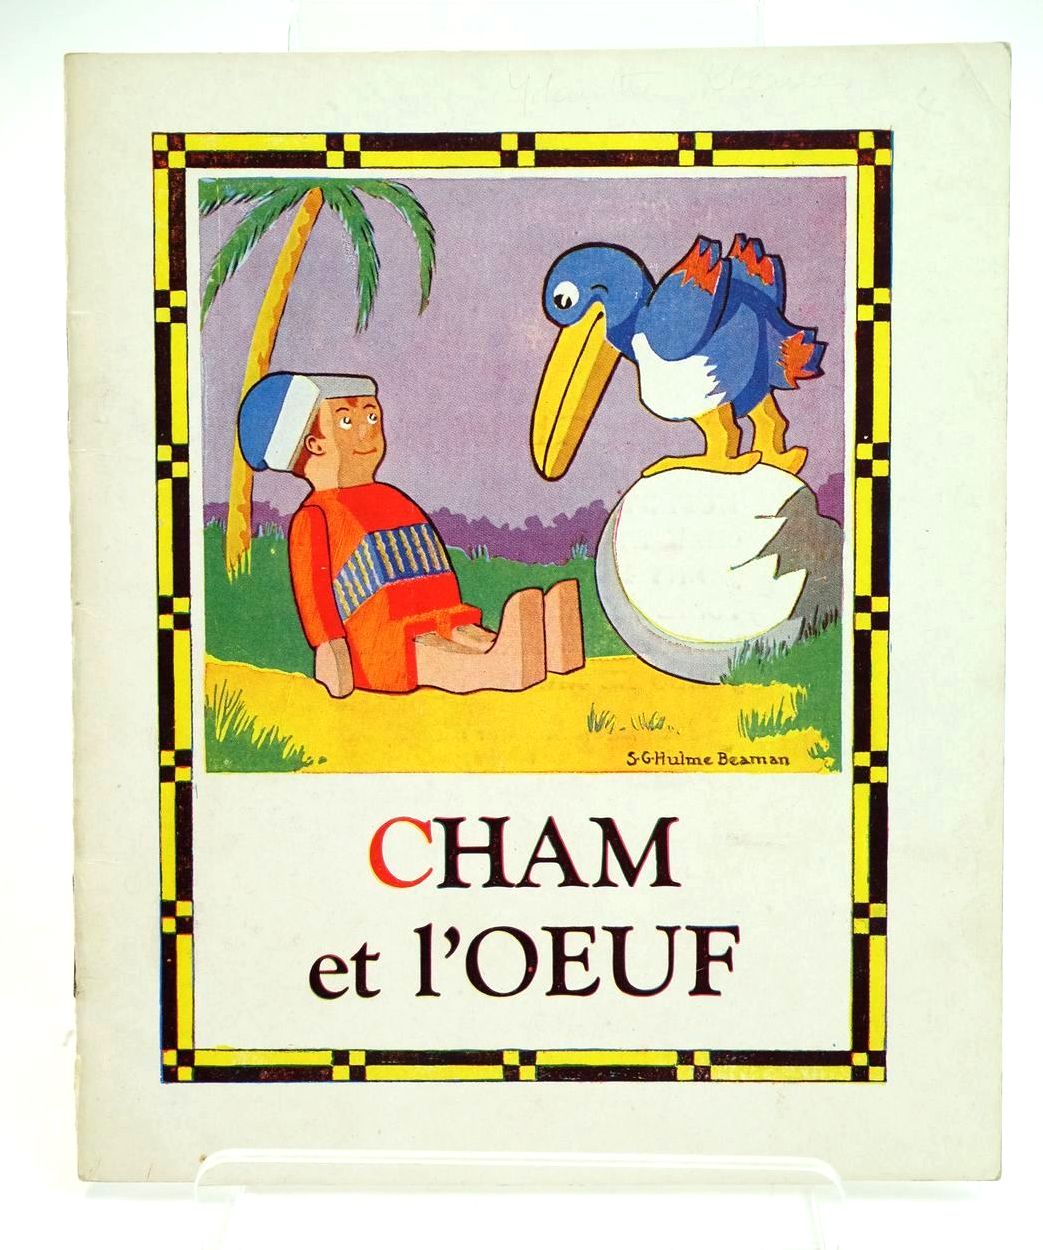 Photo of CHAM ET L'OEUF written by Beaman, S.G. Hulme illustrated by Beaman, S.G. Hulme published by Frederick Warne &amp; Co Ltd. (STOCK CODE: 1319178)  for sale by Stella & Rose's Books